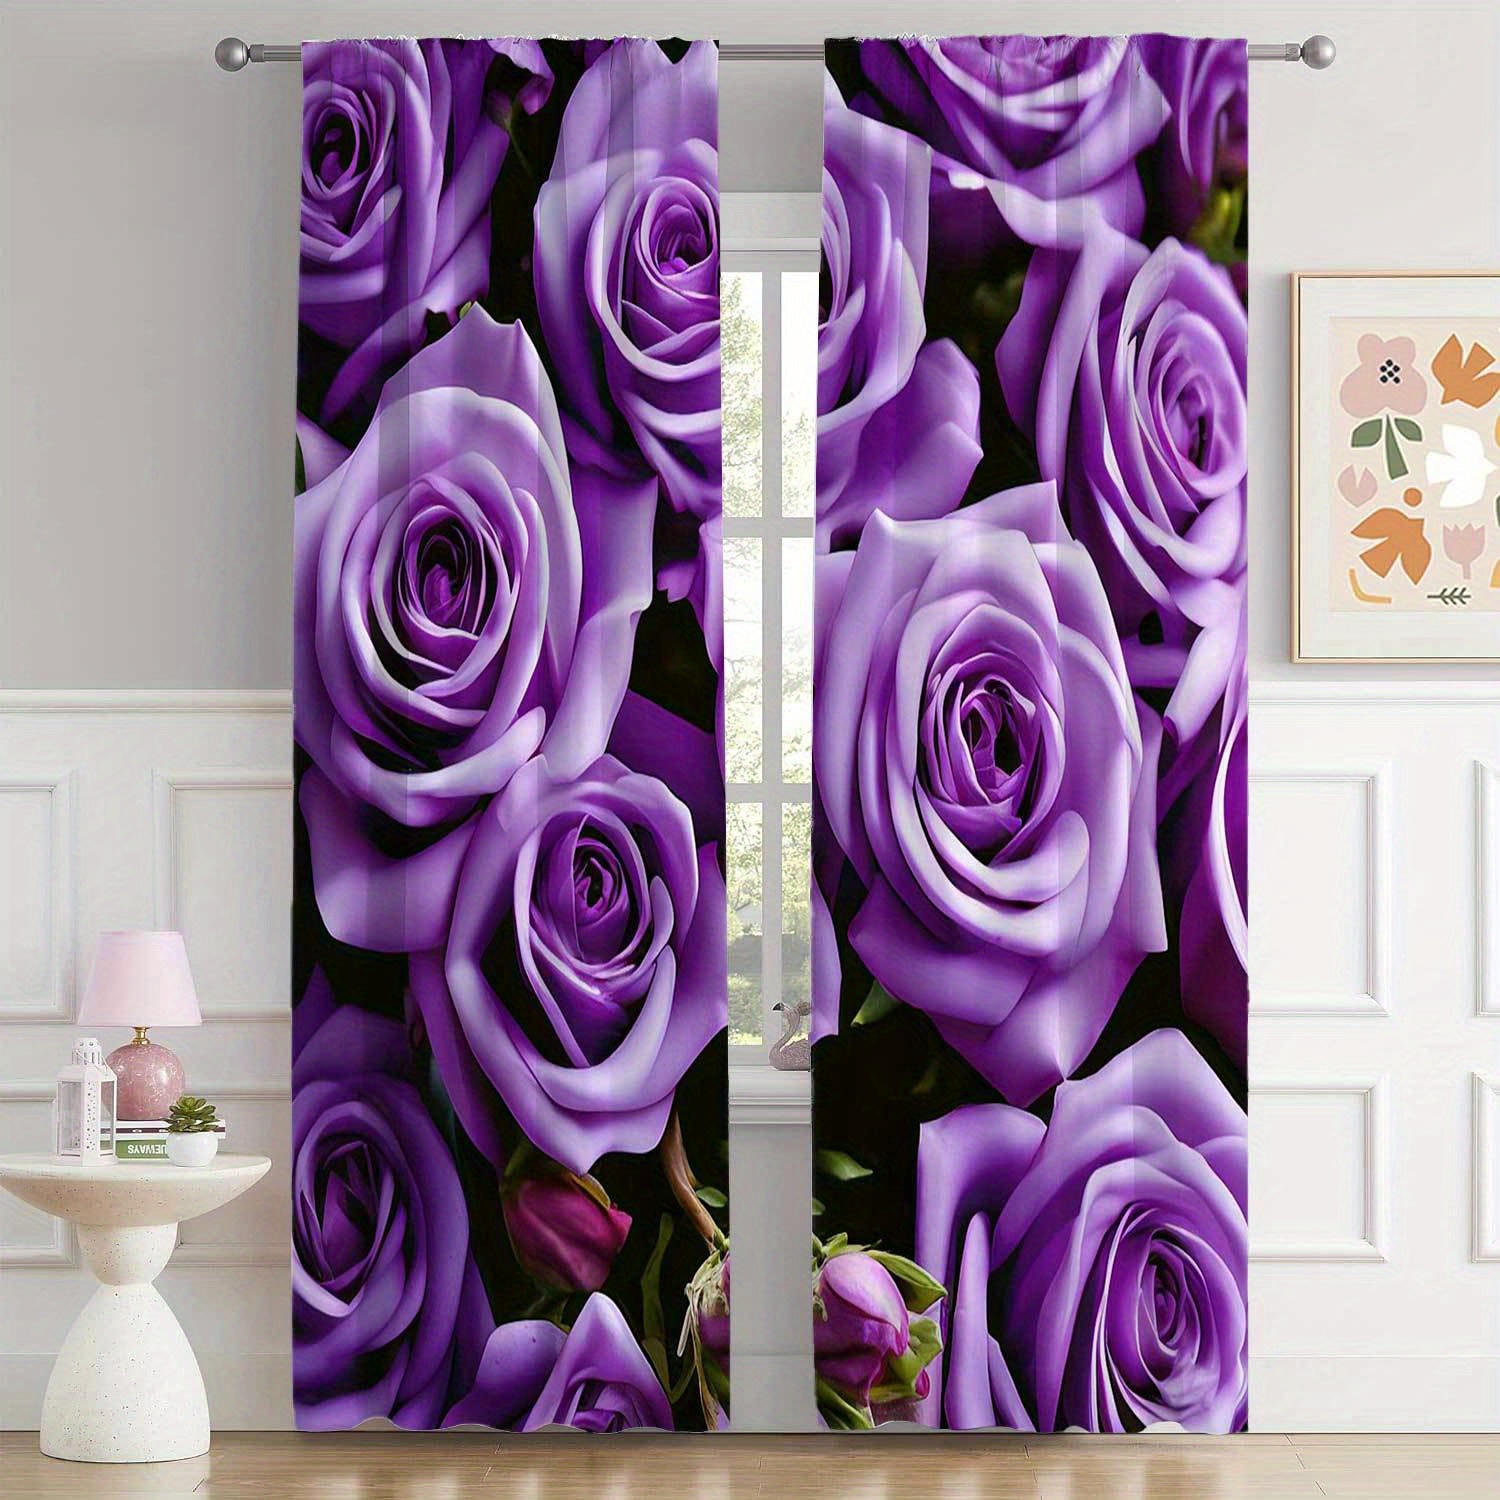 

2pcs, Living Room Curtains, Beautiful Purple Flower Print Curtains, Easy Maintenance, All-season Elegance, Durable And Easy-to-hang, For Living Room, Bedroom Decor, Room Decor, Home Decor